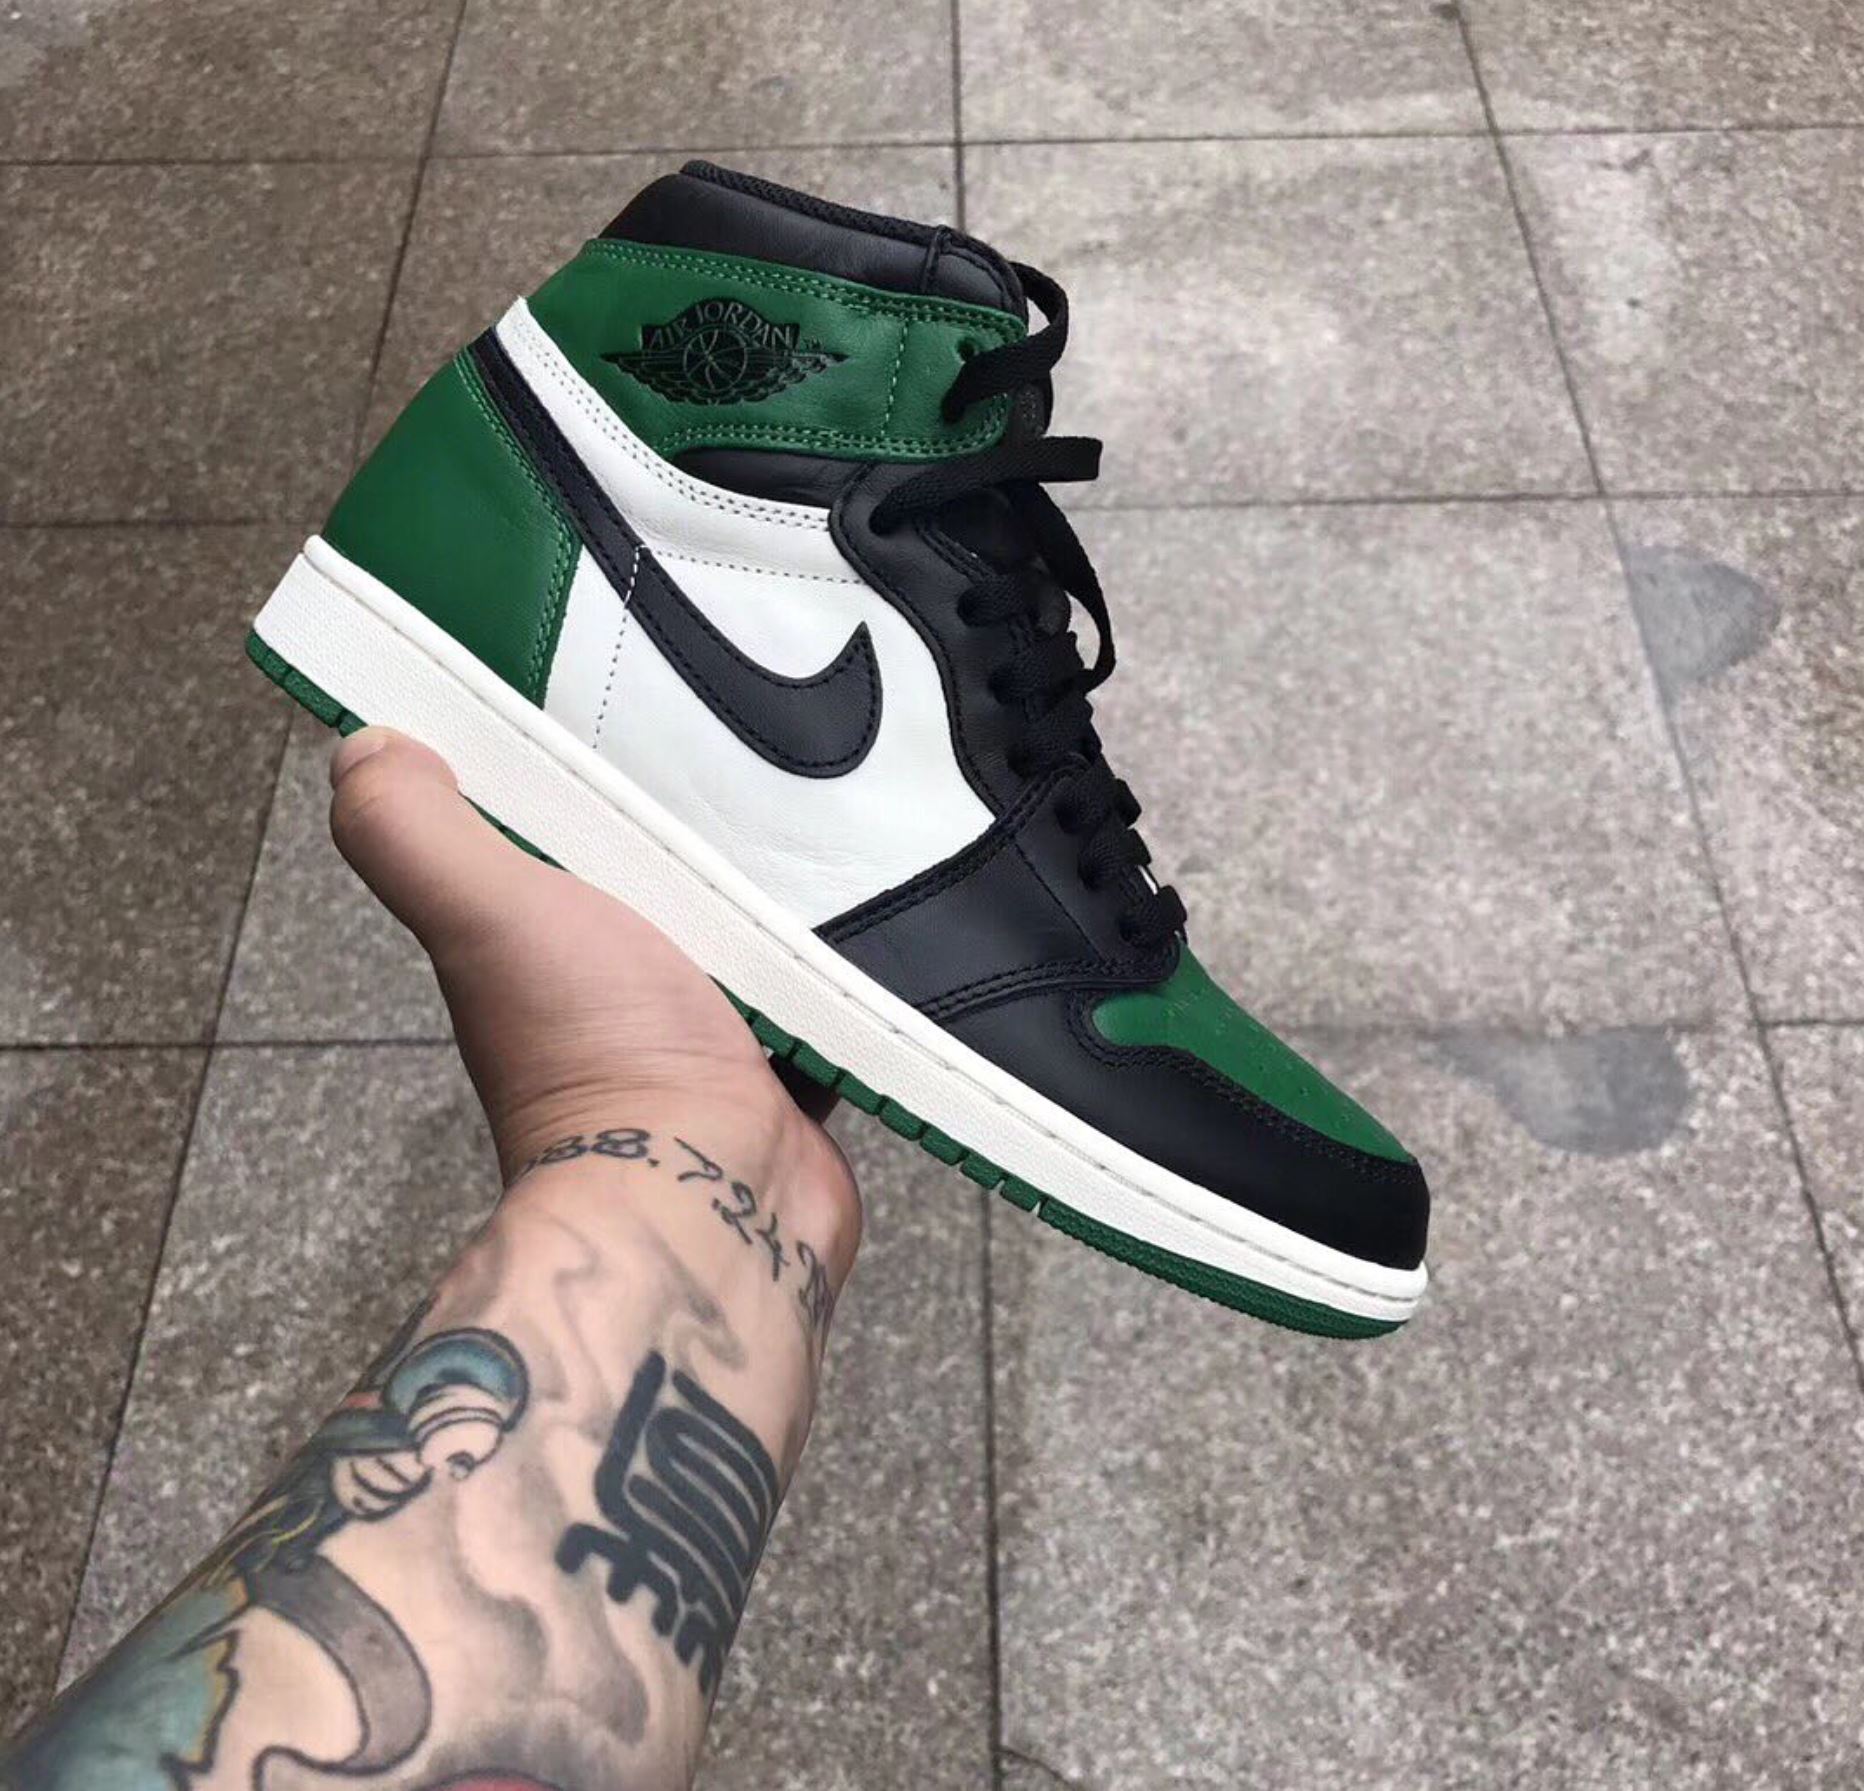 First Look at the Air Jordan 1 'Pine Green' - WearTesters